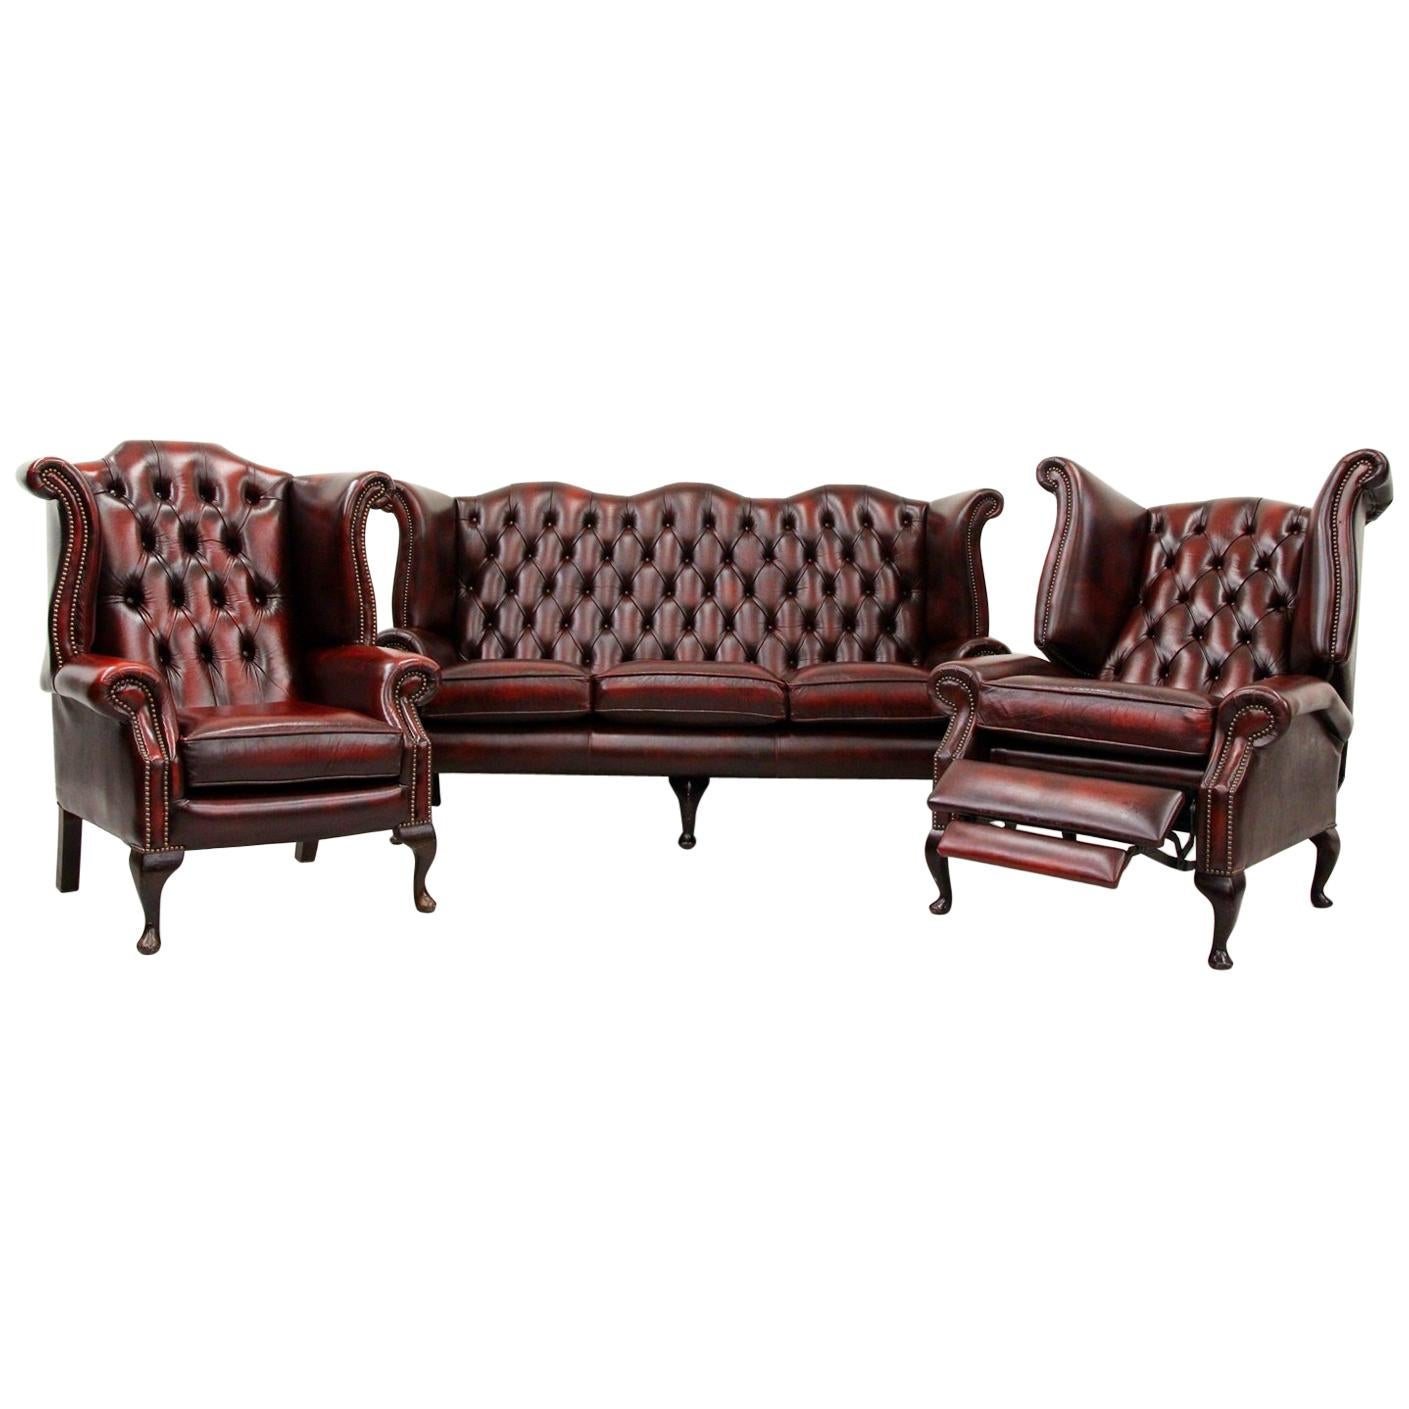 Chesterfield Sofa Armchair Leather Antique Wing Chair TV Armchair For Sale